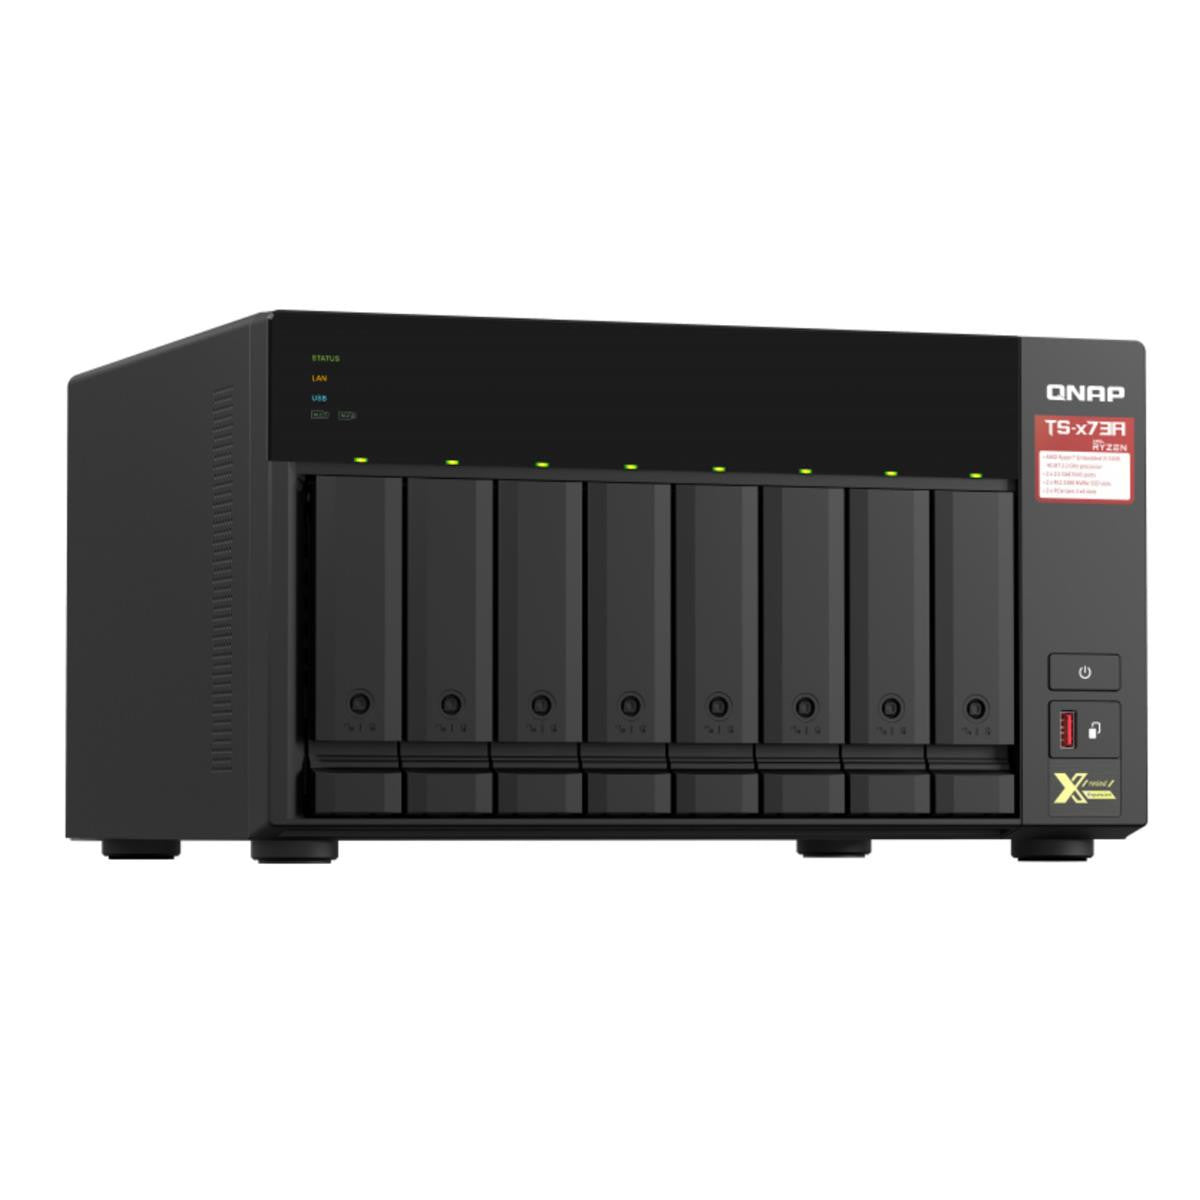 QNAP TS-873A 8-BAY NAS with 64GB DDR4 RAM and 24TB (8x3TB) Seagate Ironwolf NAS Drives Fully Assembled and Tested